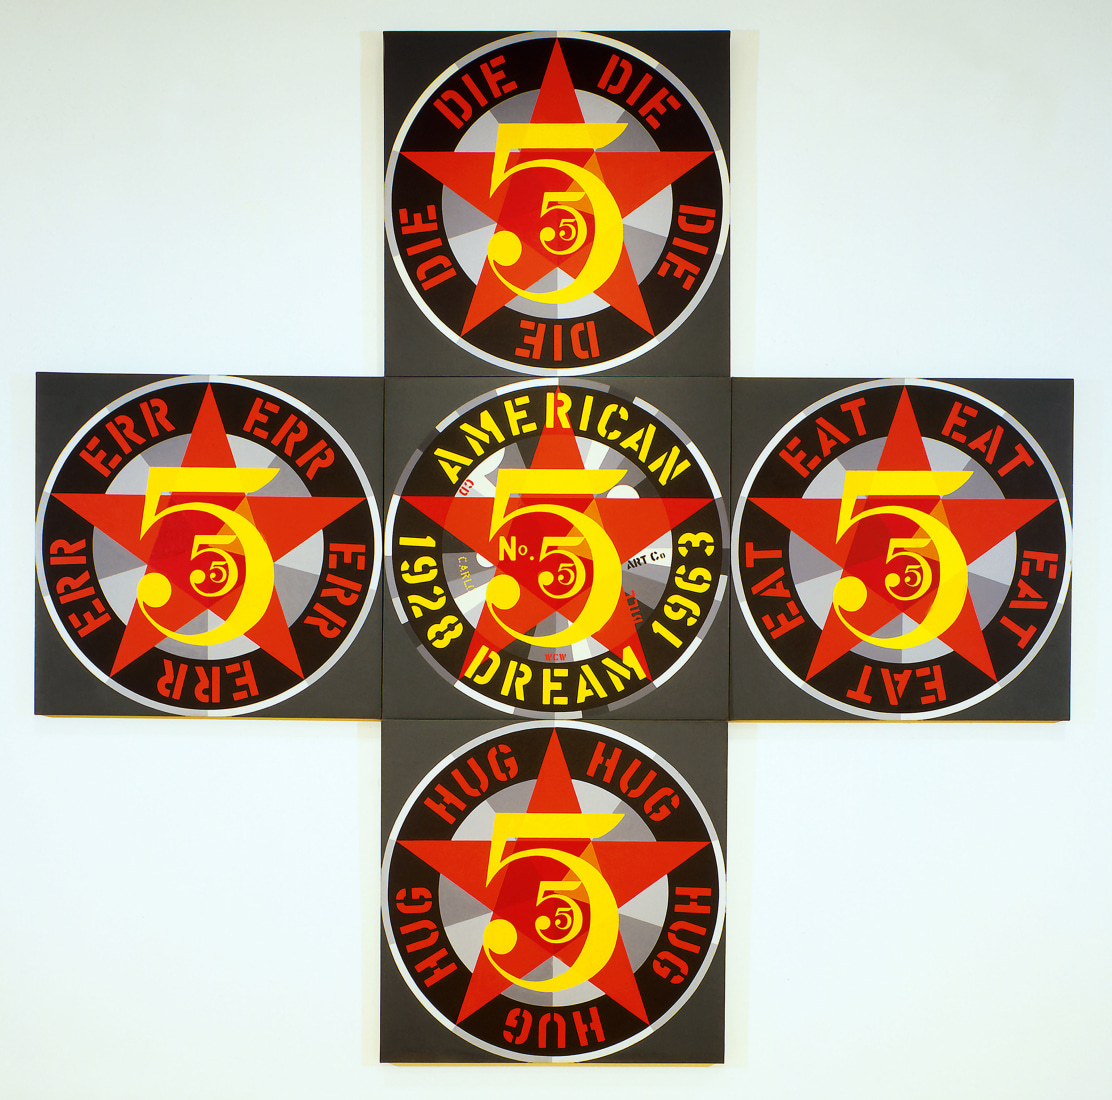 The Demuth American Dream No. 5, a cross shaped painting made up five panels. Each panel has a dark gray ground and holds a three yellow number fives in three sizes against a red star. Each panel has a black ring of text around the fives. The central ring has the text American Dream and the dates 1928 and 1963 in yellow. Each other ring contains a word painted in red which appears five times, in between each arm of the star. The word in the top panel is DIE, in the right panel it's EAT, in the lower panel HUG, and in the left panel ERR